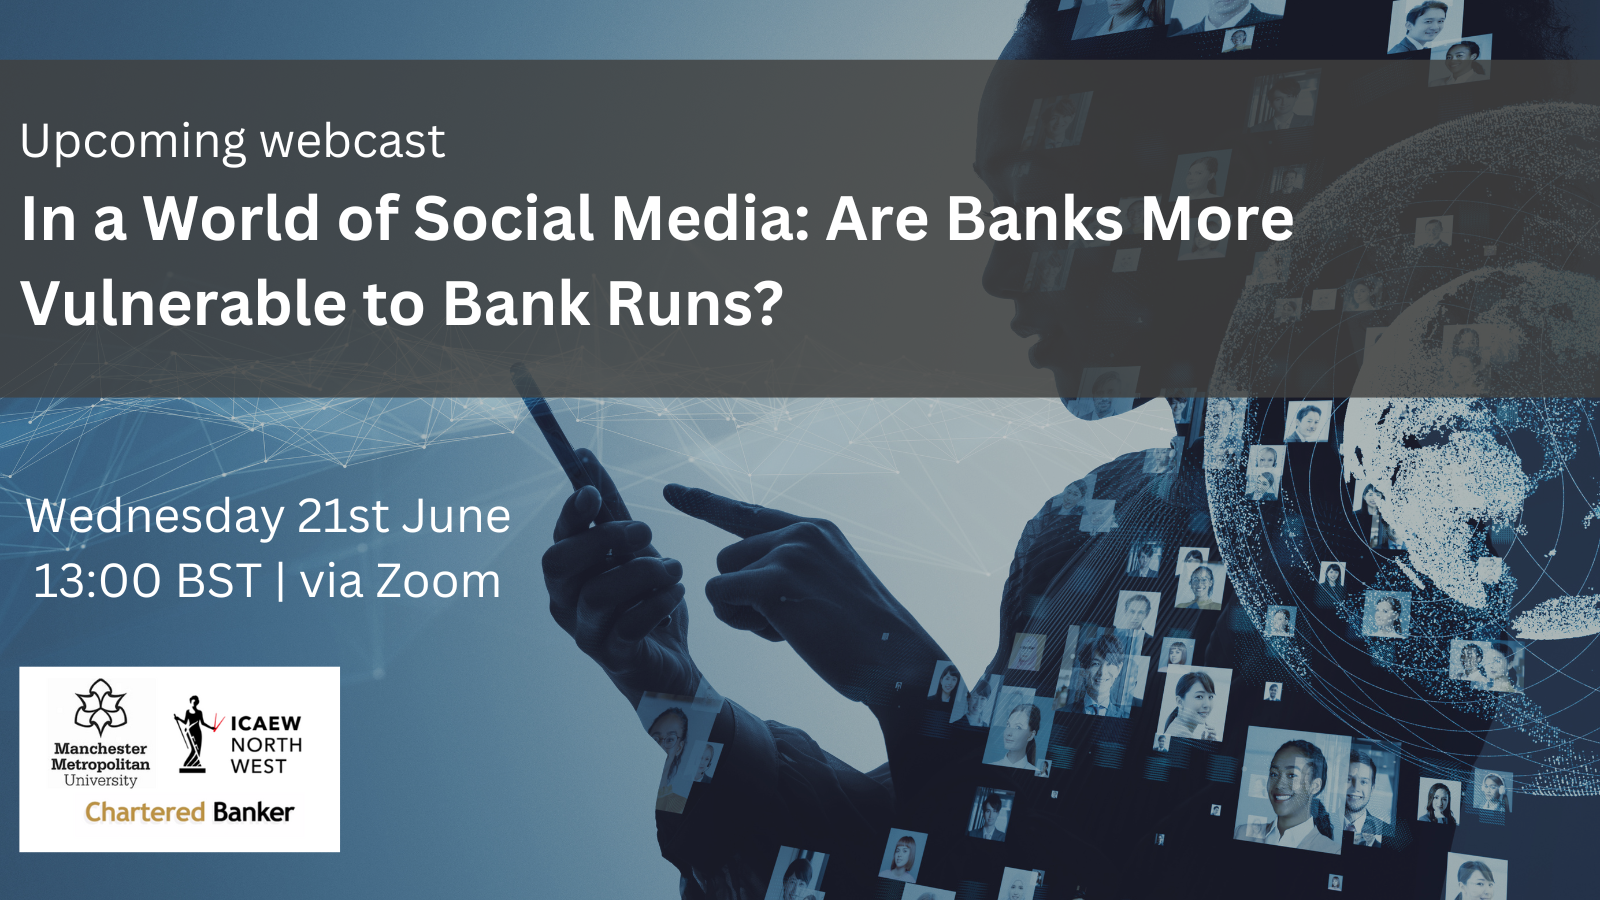 In a World of Social Media: Are Banks More Vulnerable to Bank Runs?